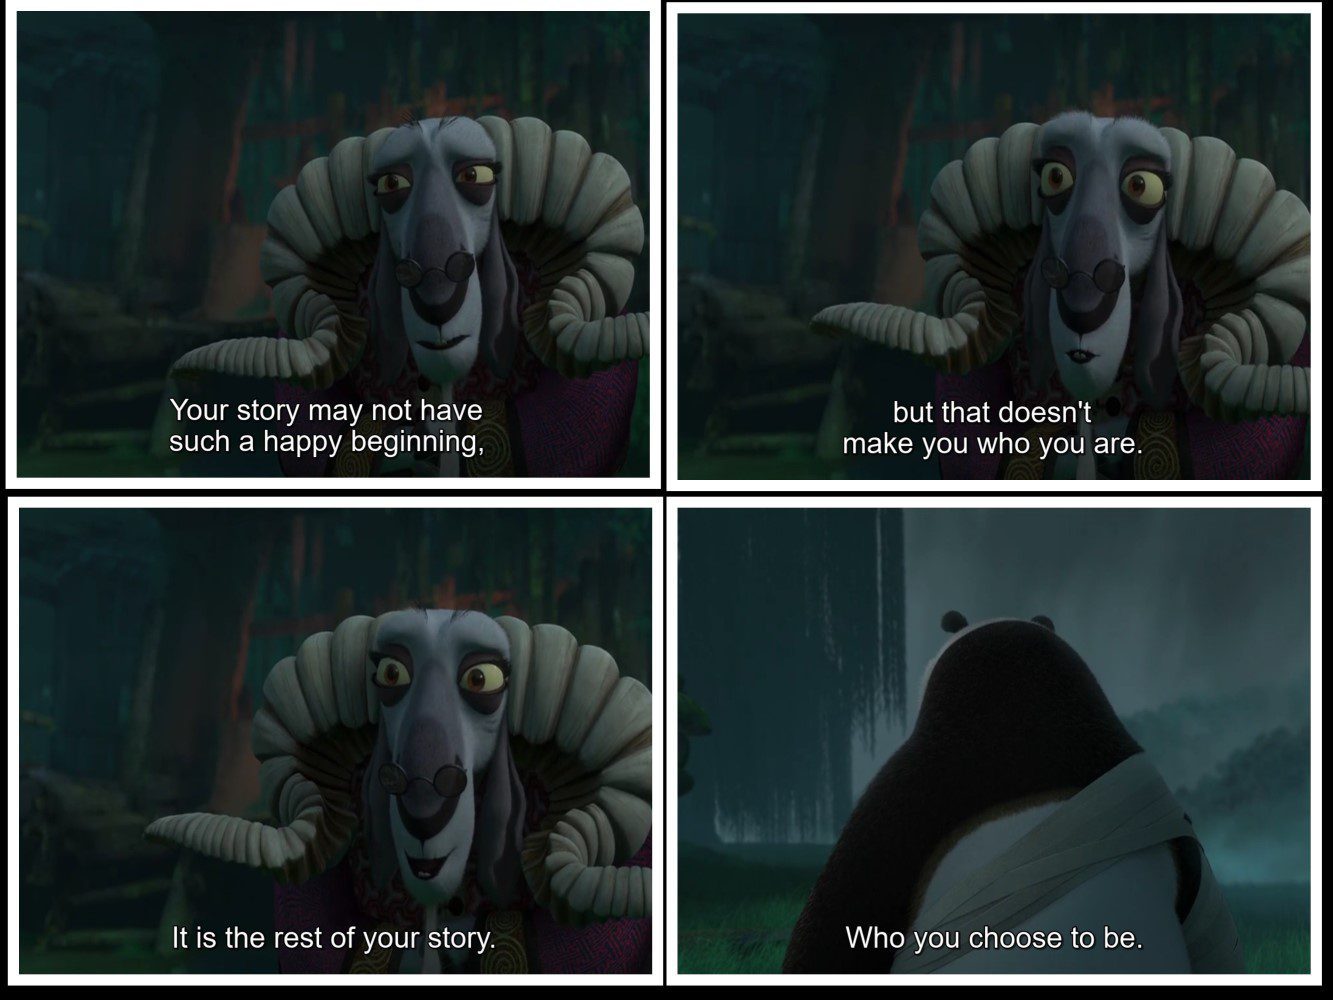 Beerus' instruction is very similar to the Soothslayer's in Kung Fu Panda